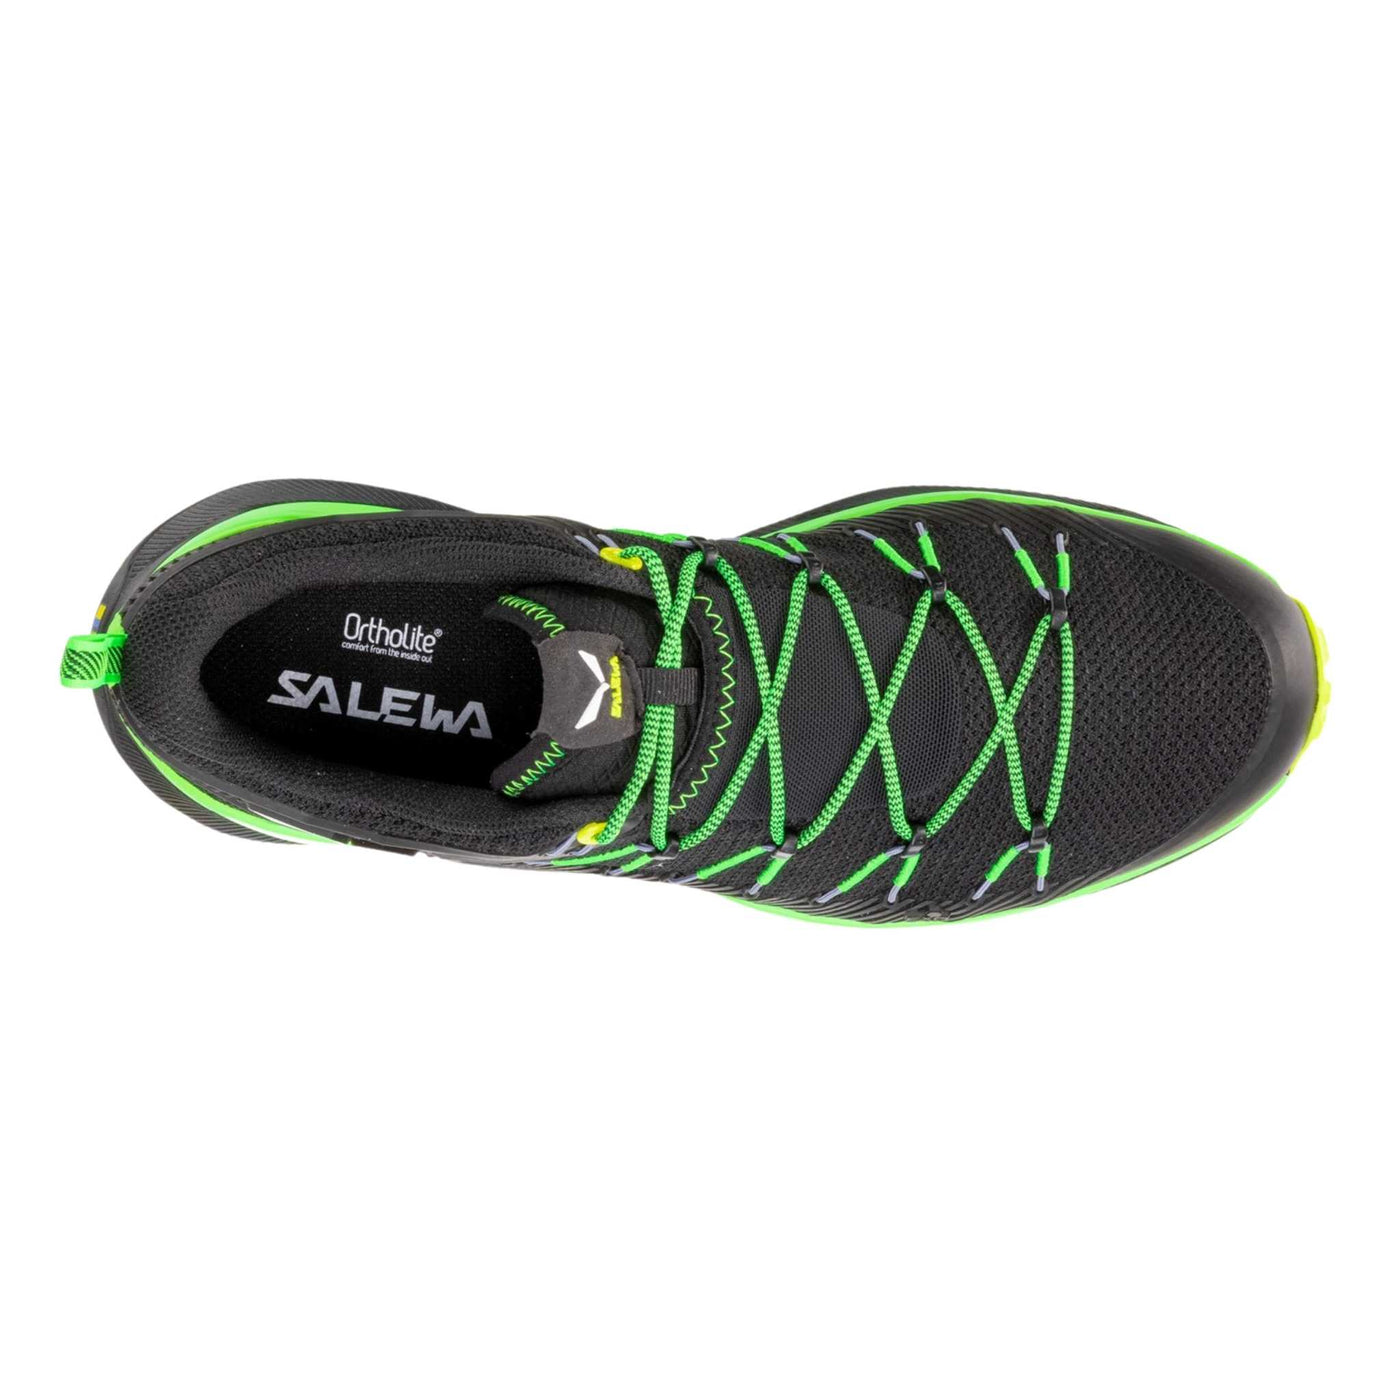 Salewa Clearance Dropline - Mens | Speedhiking Shoes | Further Faster Christchurch NZ #fluo-green-fluo-yellow